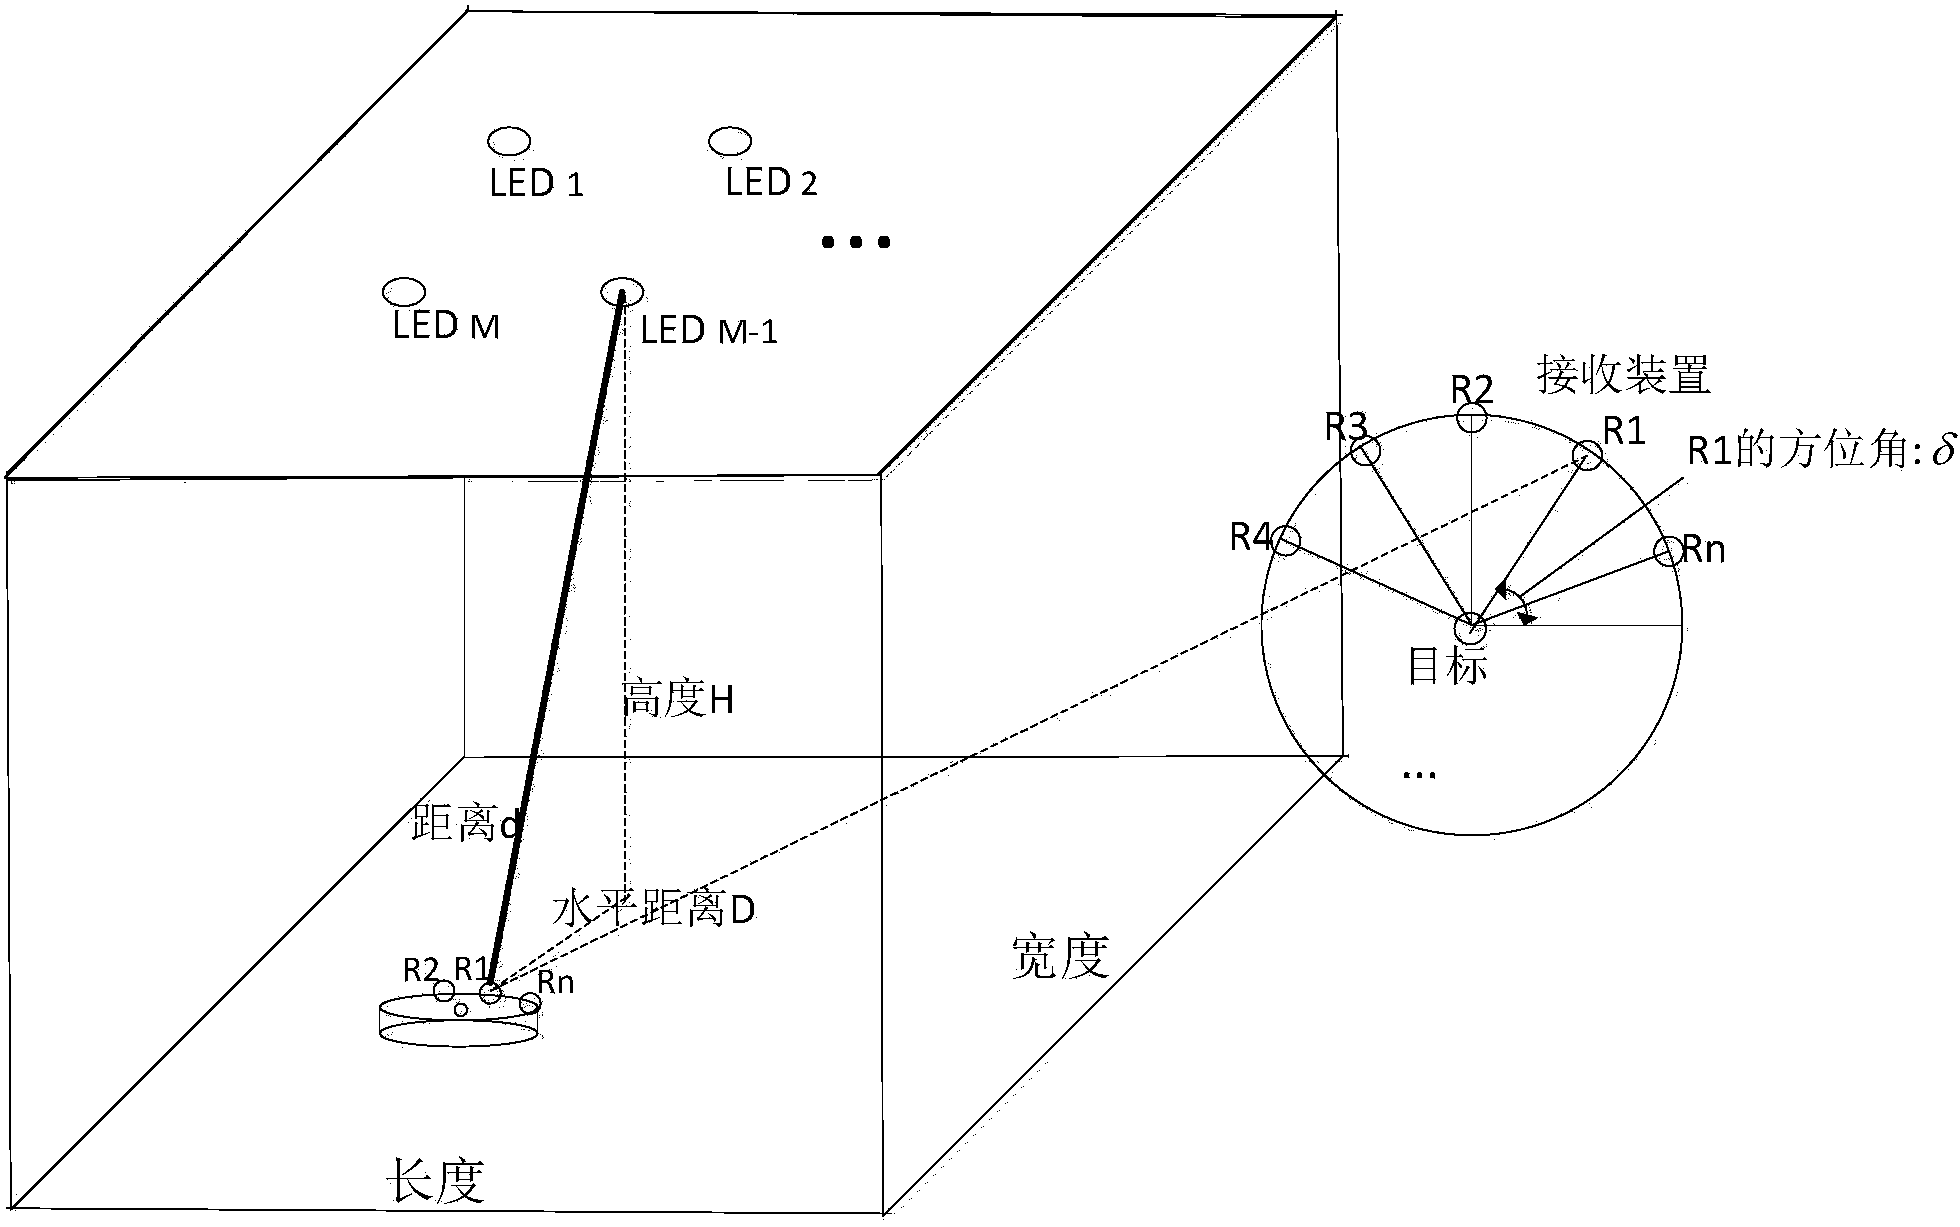 Multi-receiving-point geometrical center locating system and method for visible light communication